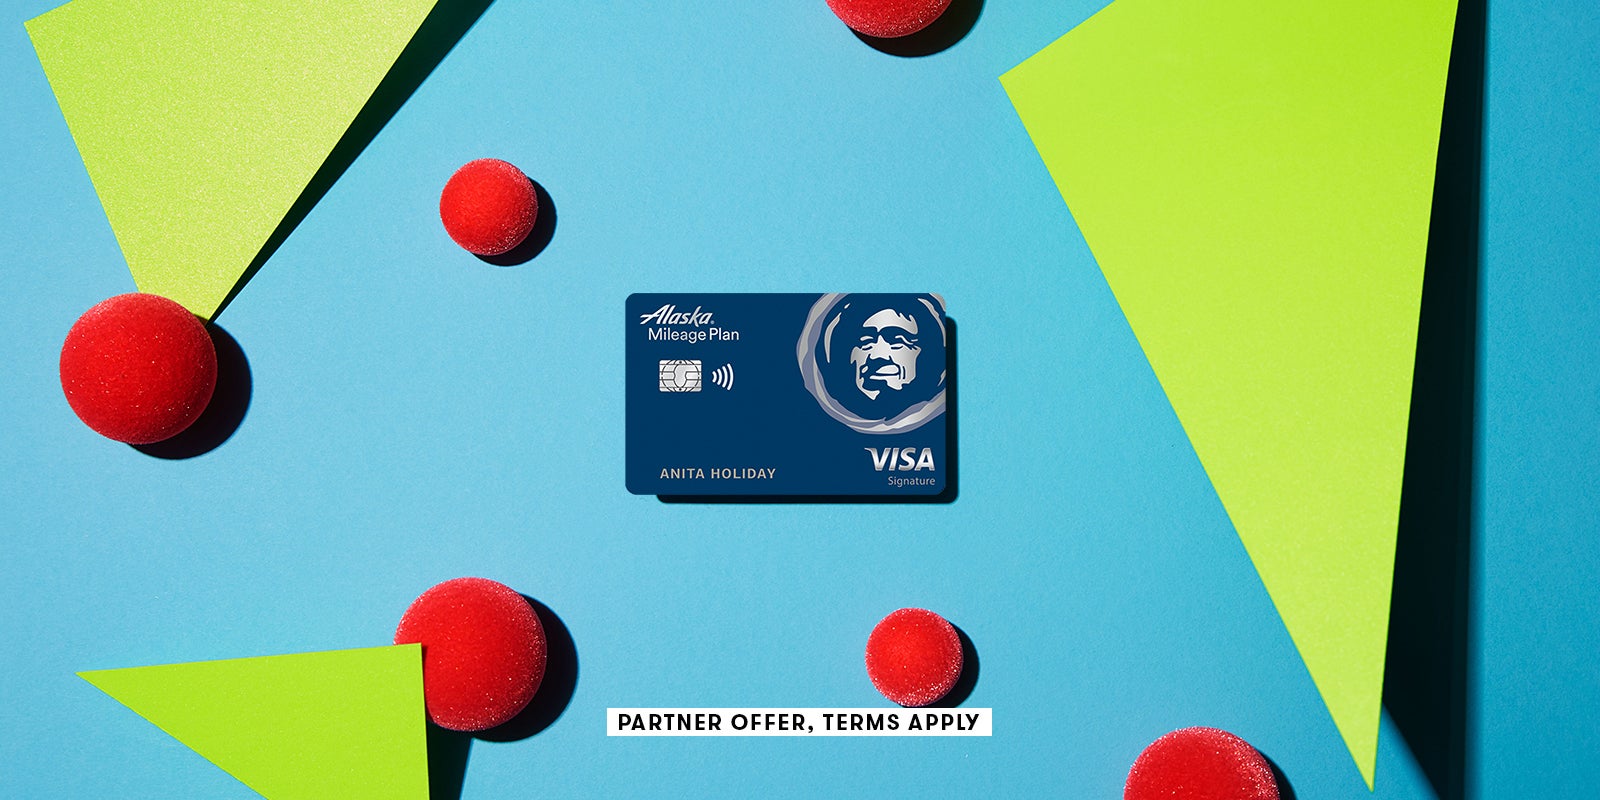 Credit card review Is the Alaska Airlines Visa Signature card right